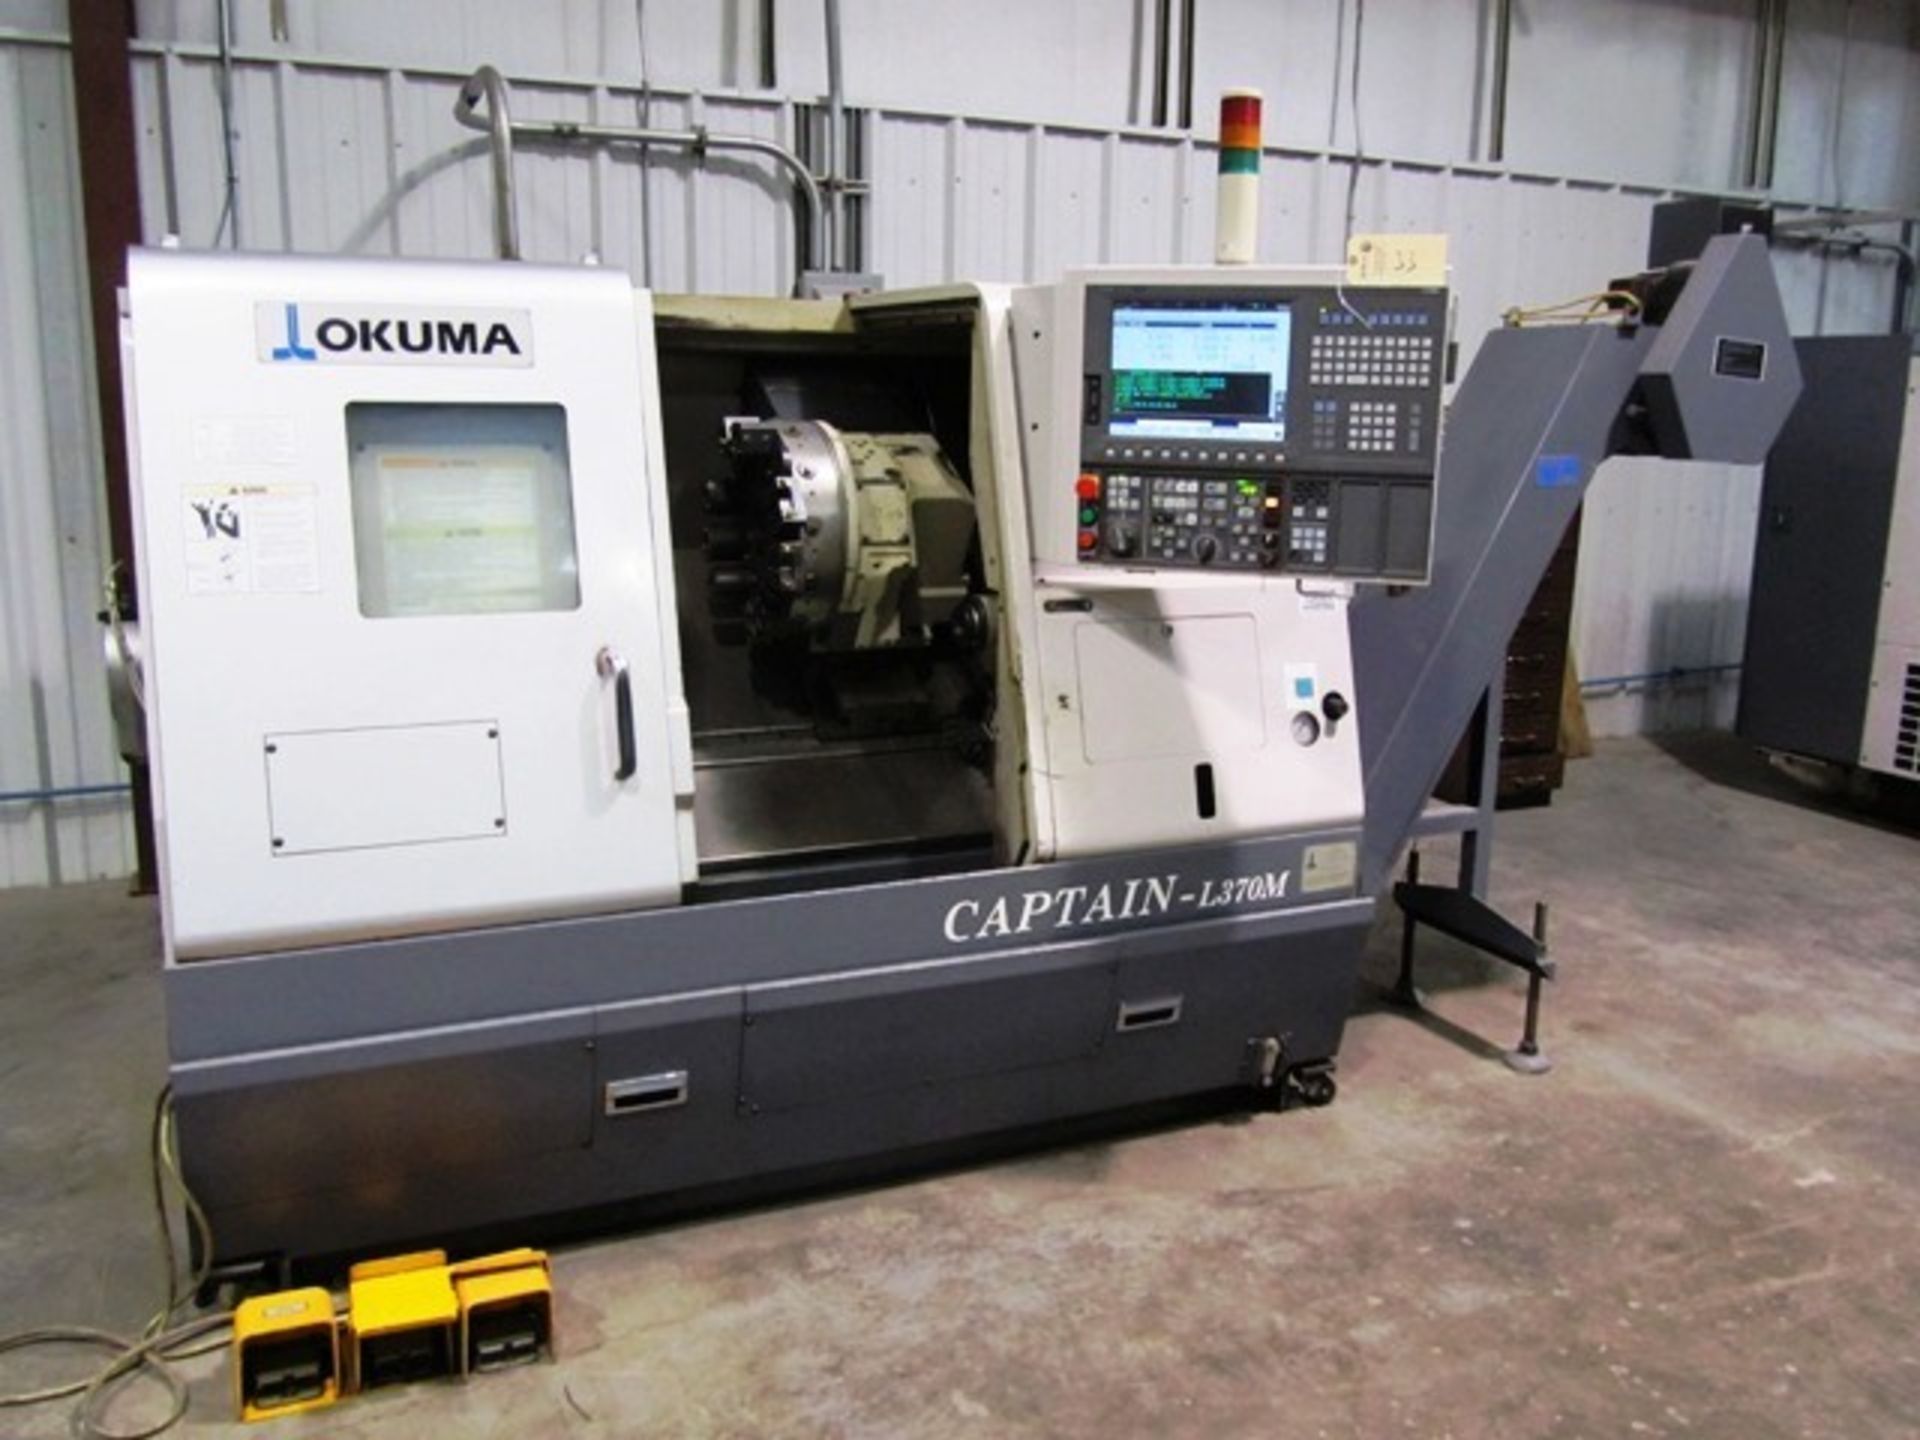 Okuma Model Captain L370M CNC Turning Center with Milling, `C' Axis, 12 Station Turret, Collet